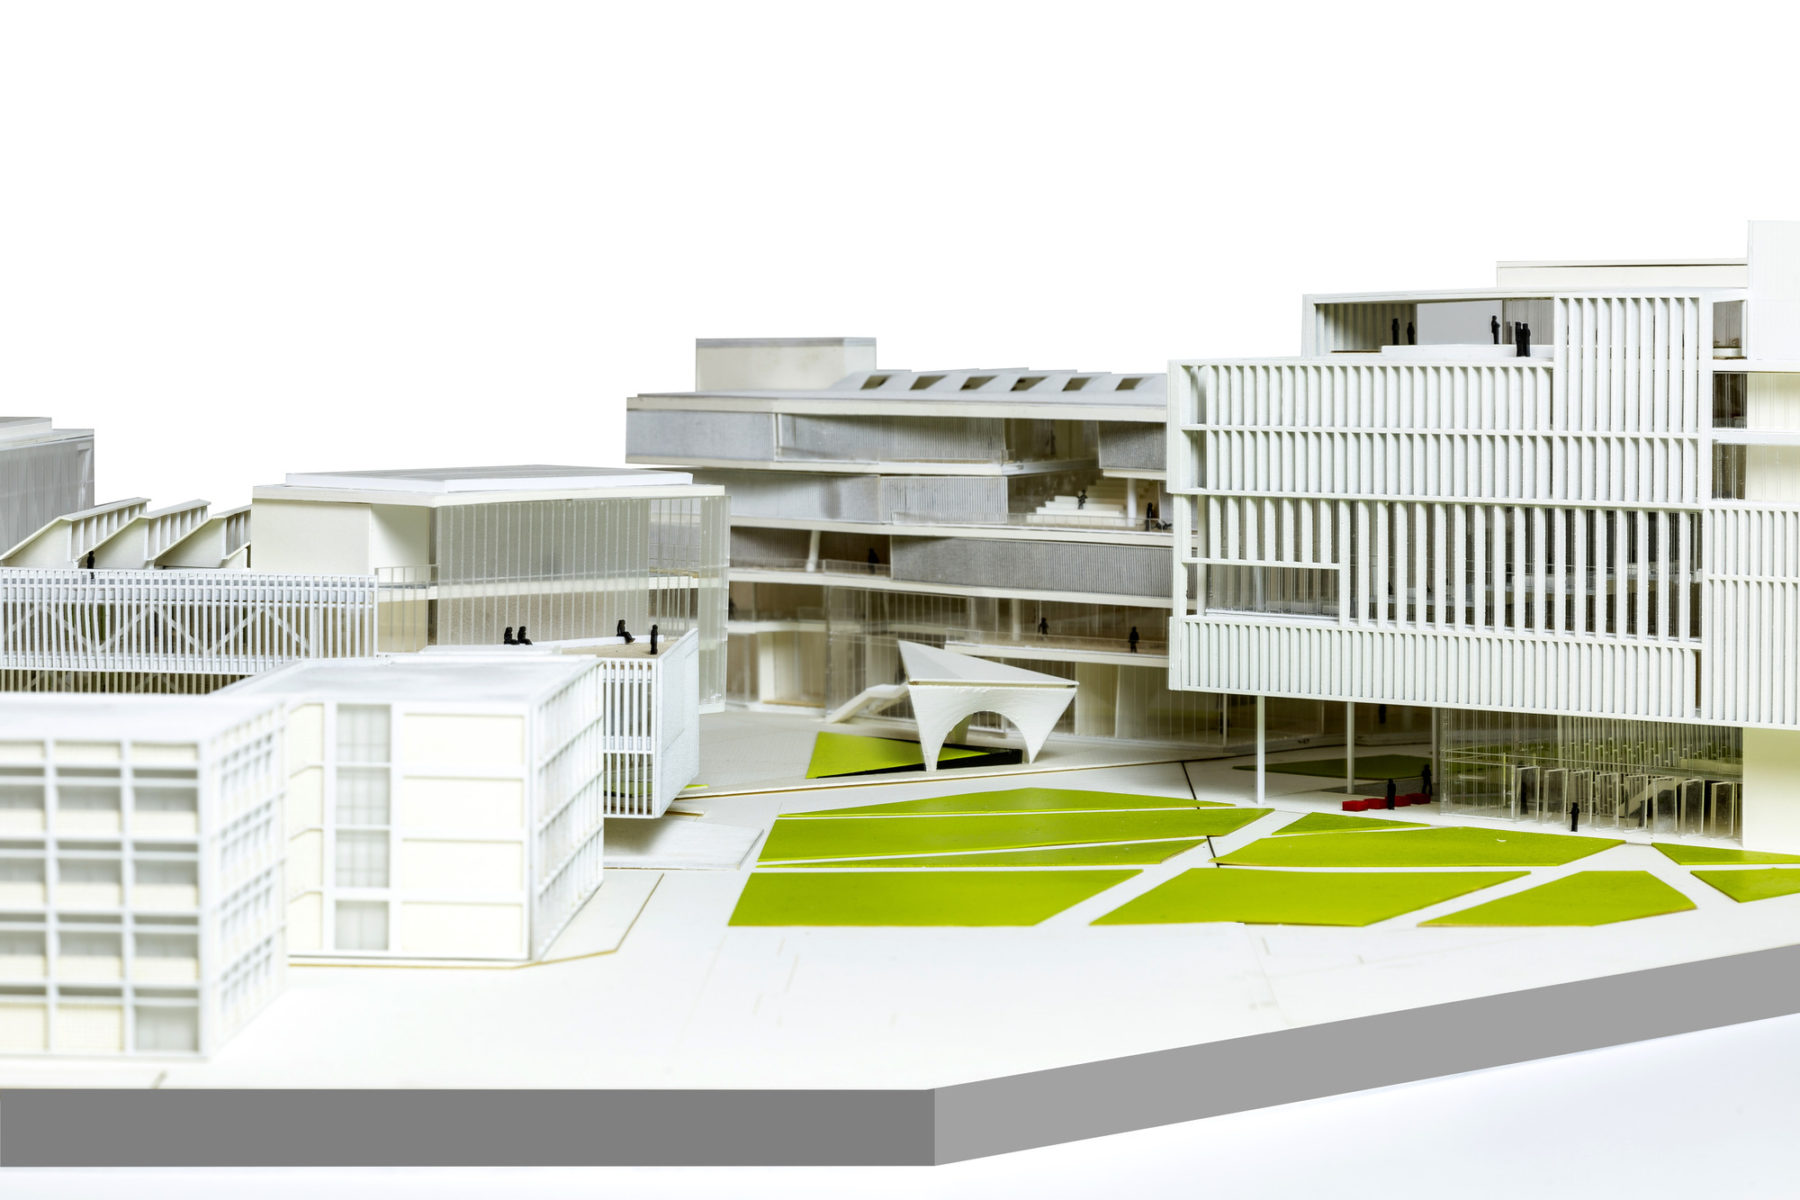 Photo of a model of the new buildings and quad